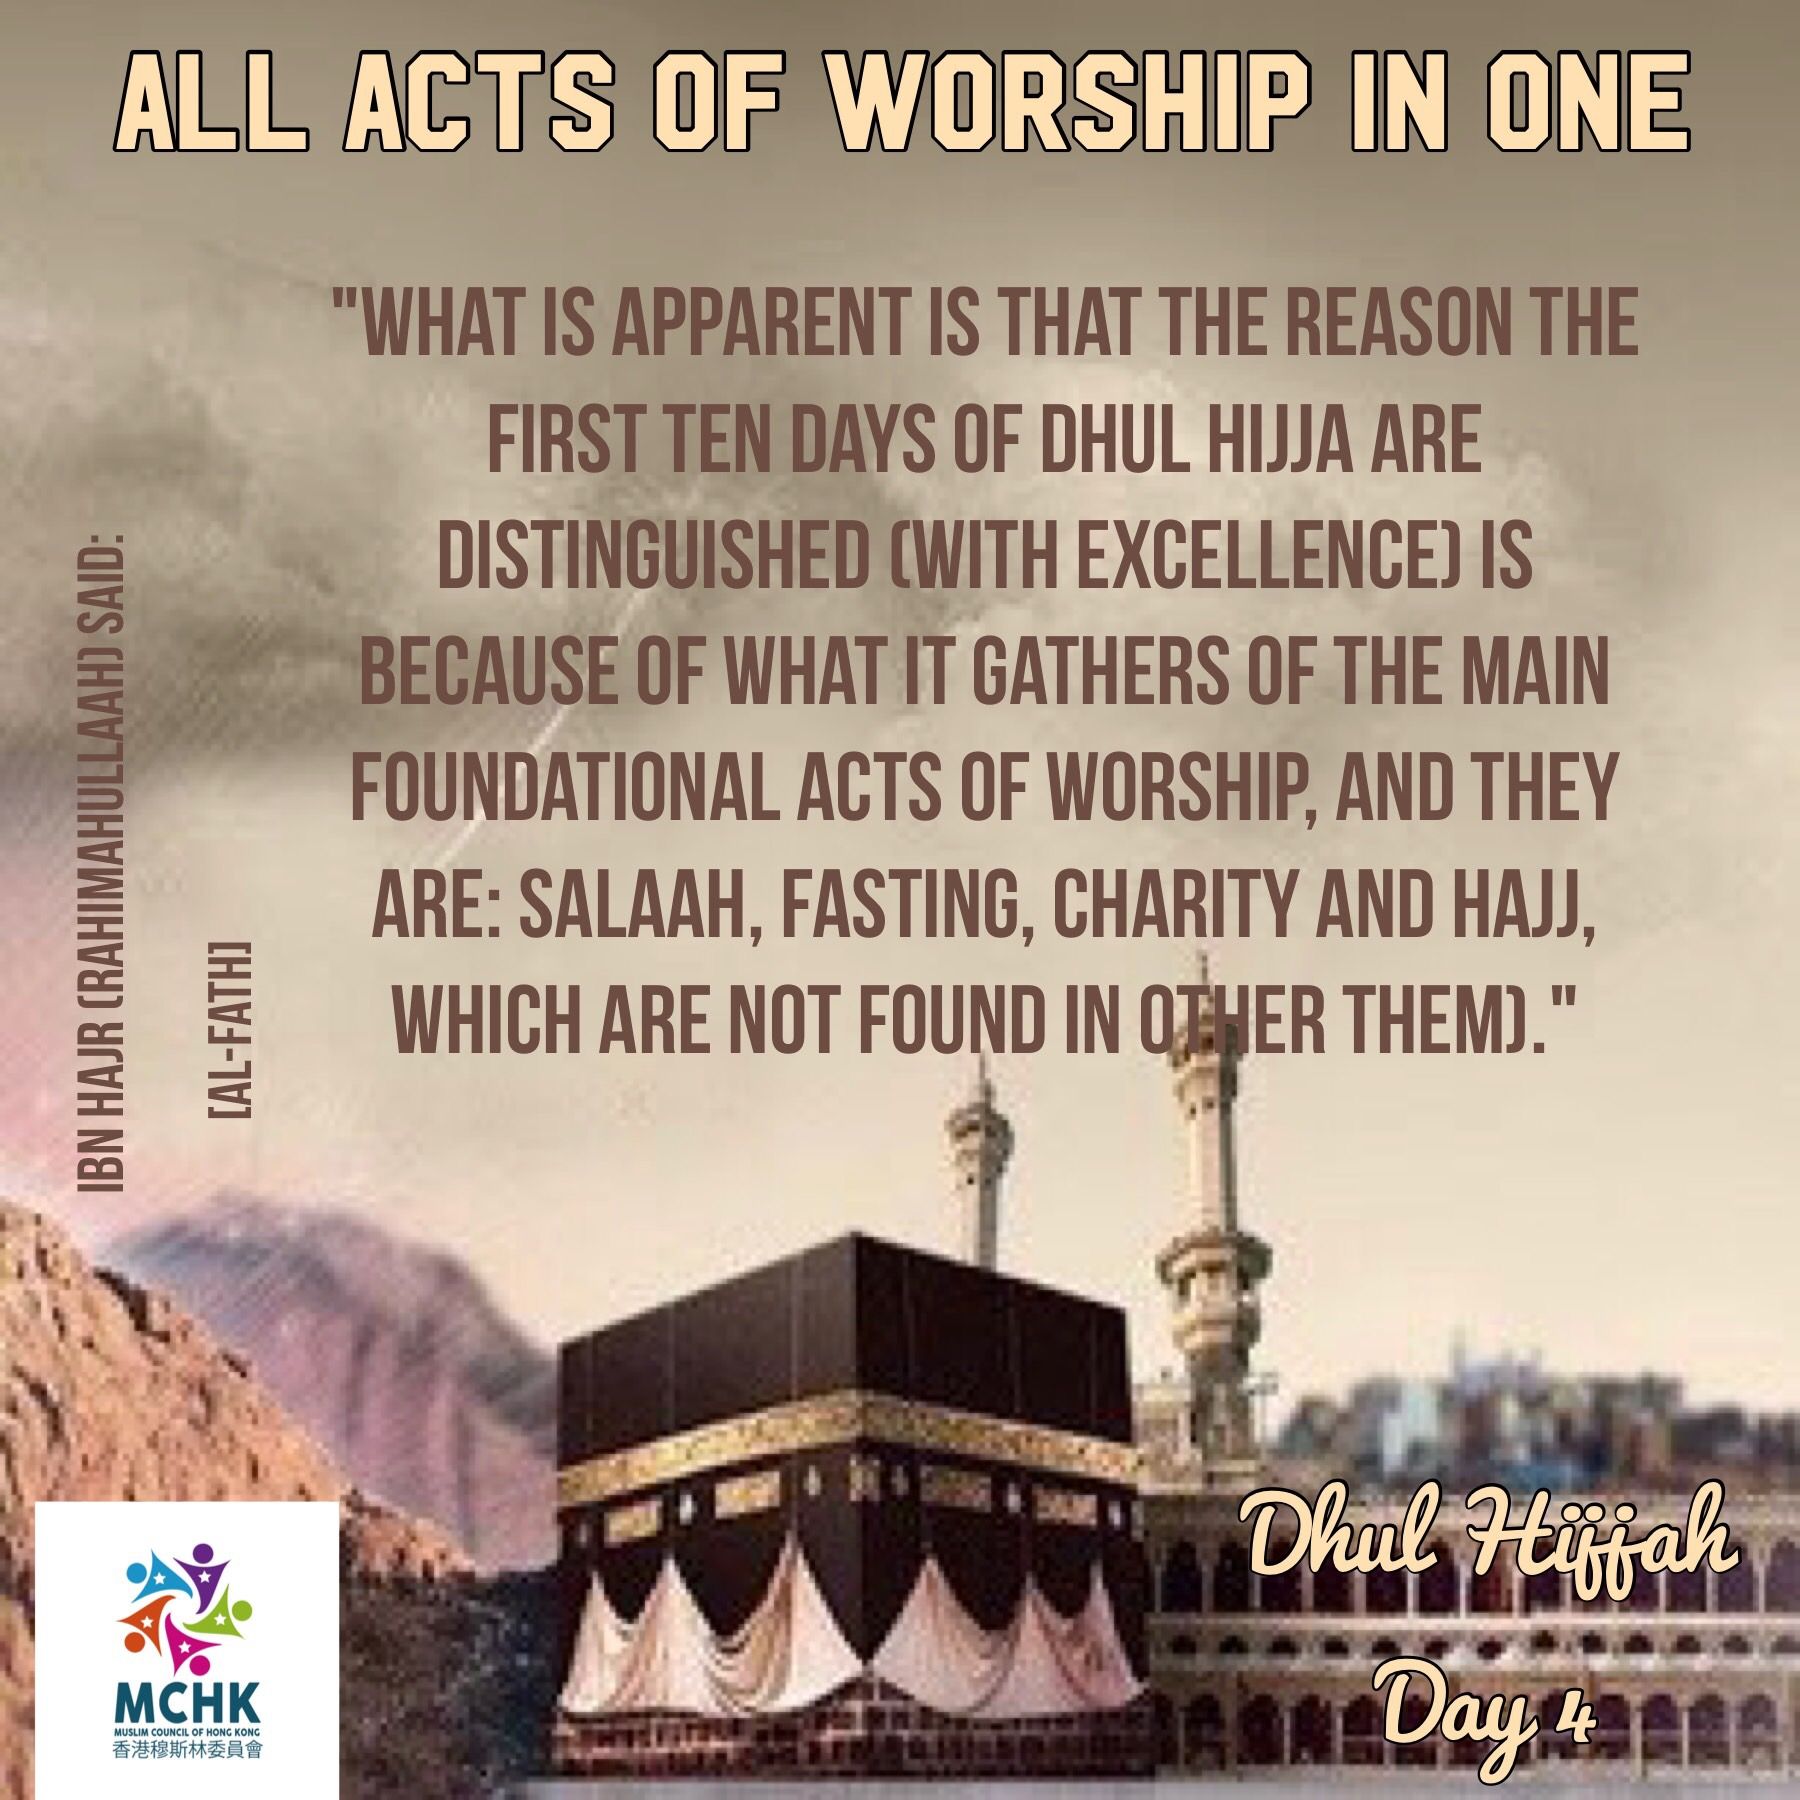 All Acts of Worship into One. These 10 days of Dhul Hijjah have ...